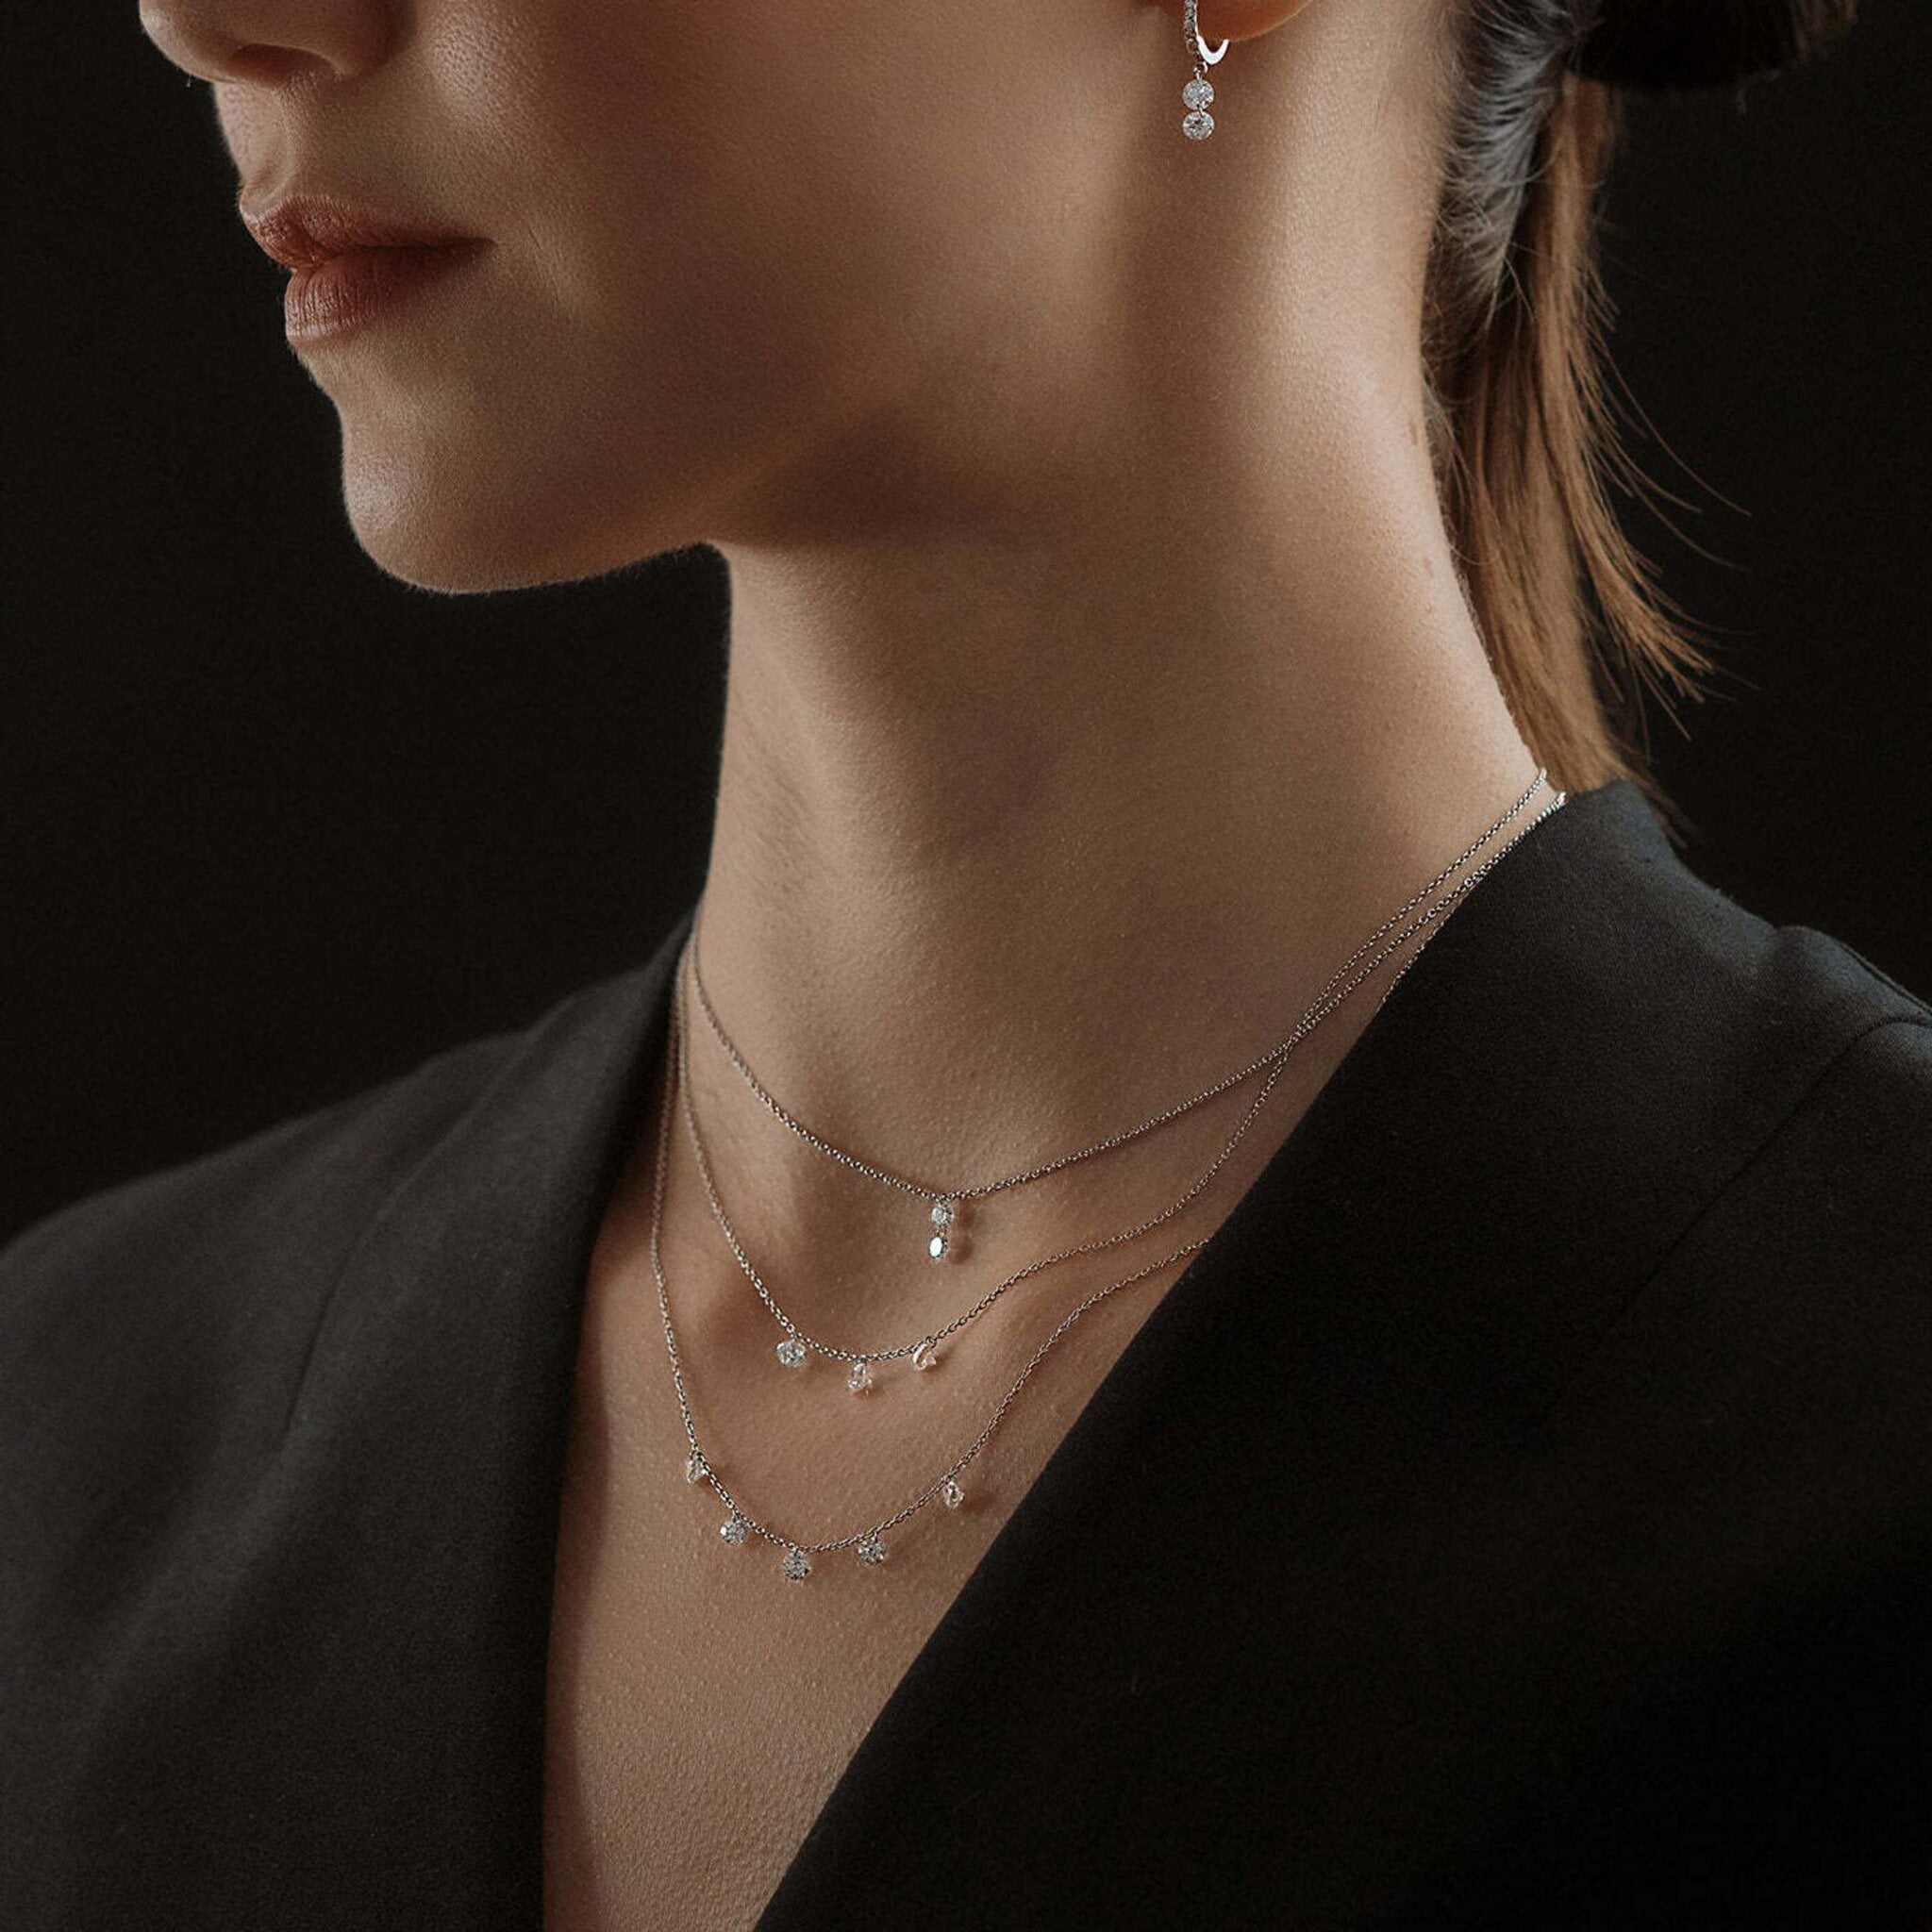 Aresa New York - Lessing No. 5 Necklaces - 18K Rose Gold with 1.00 cts. of Diamonds